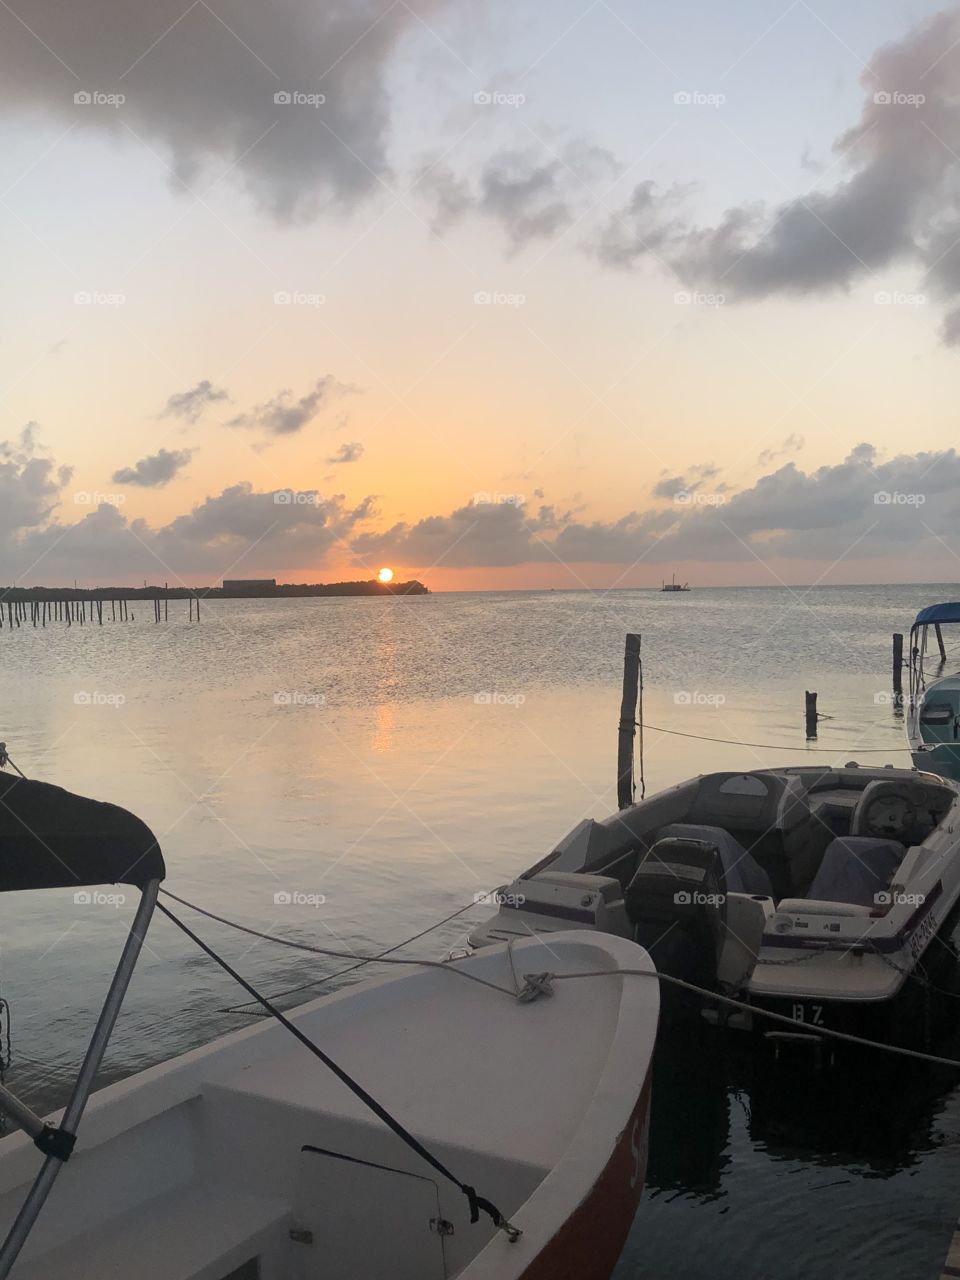 A view of an orange sunset from a boat at the dock on a Caribbean island 